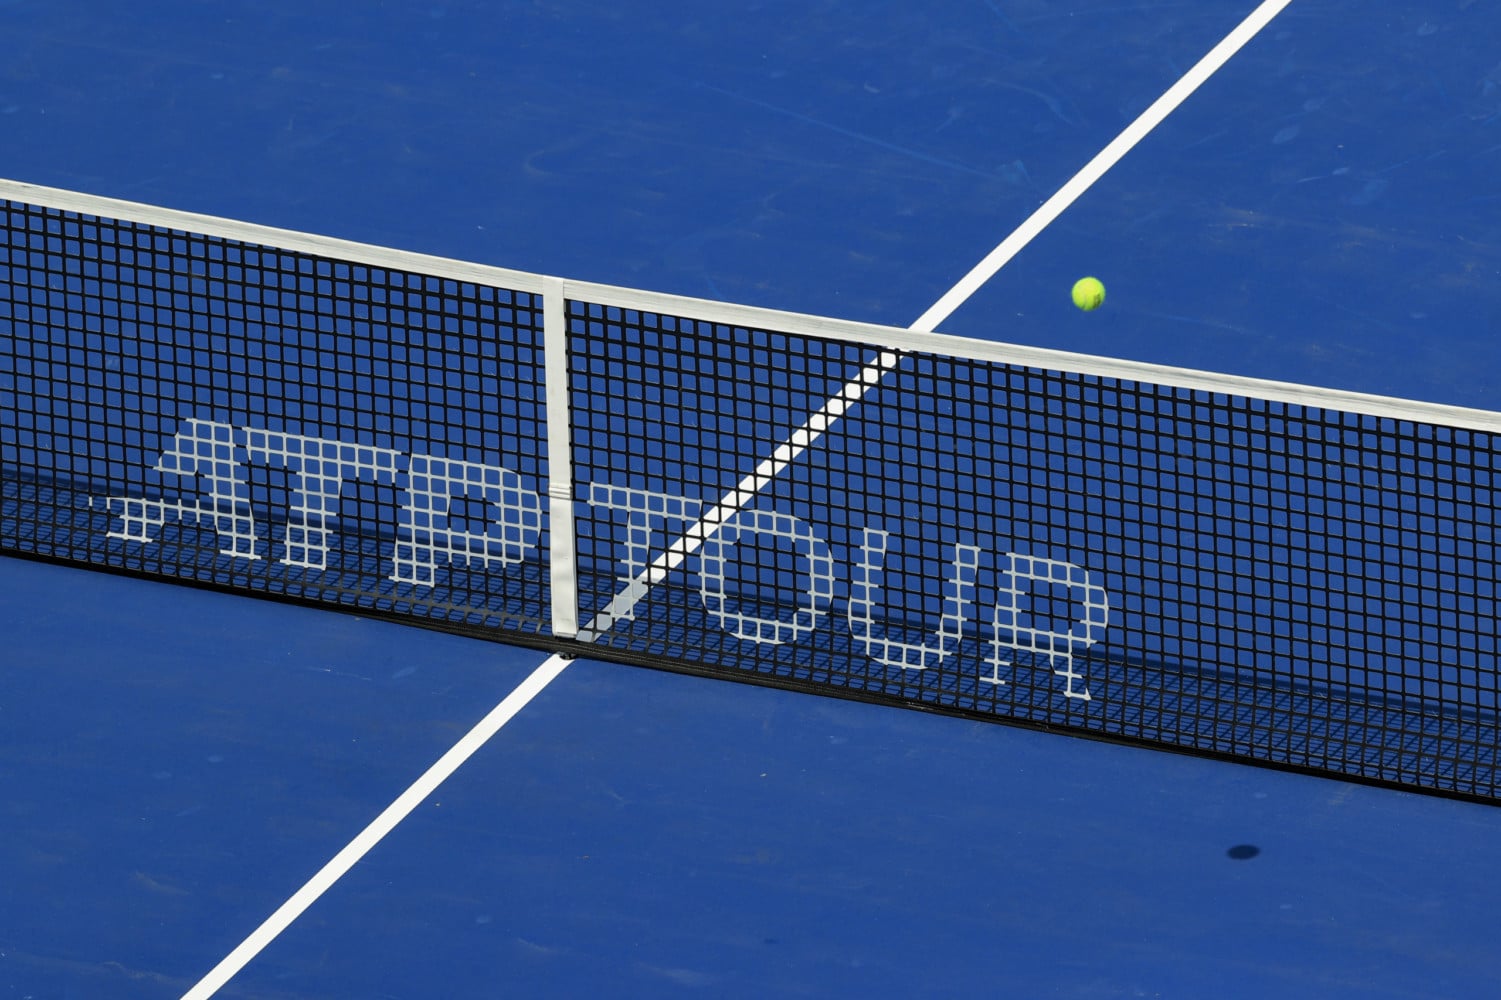 ATP Masters 1000 Tennis Tournaments and Betting